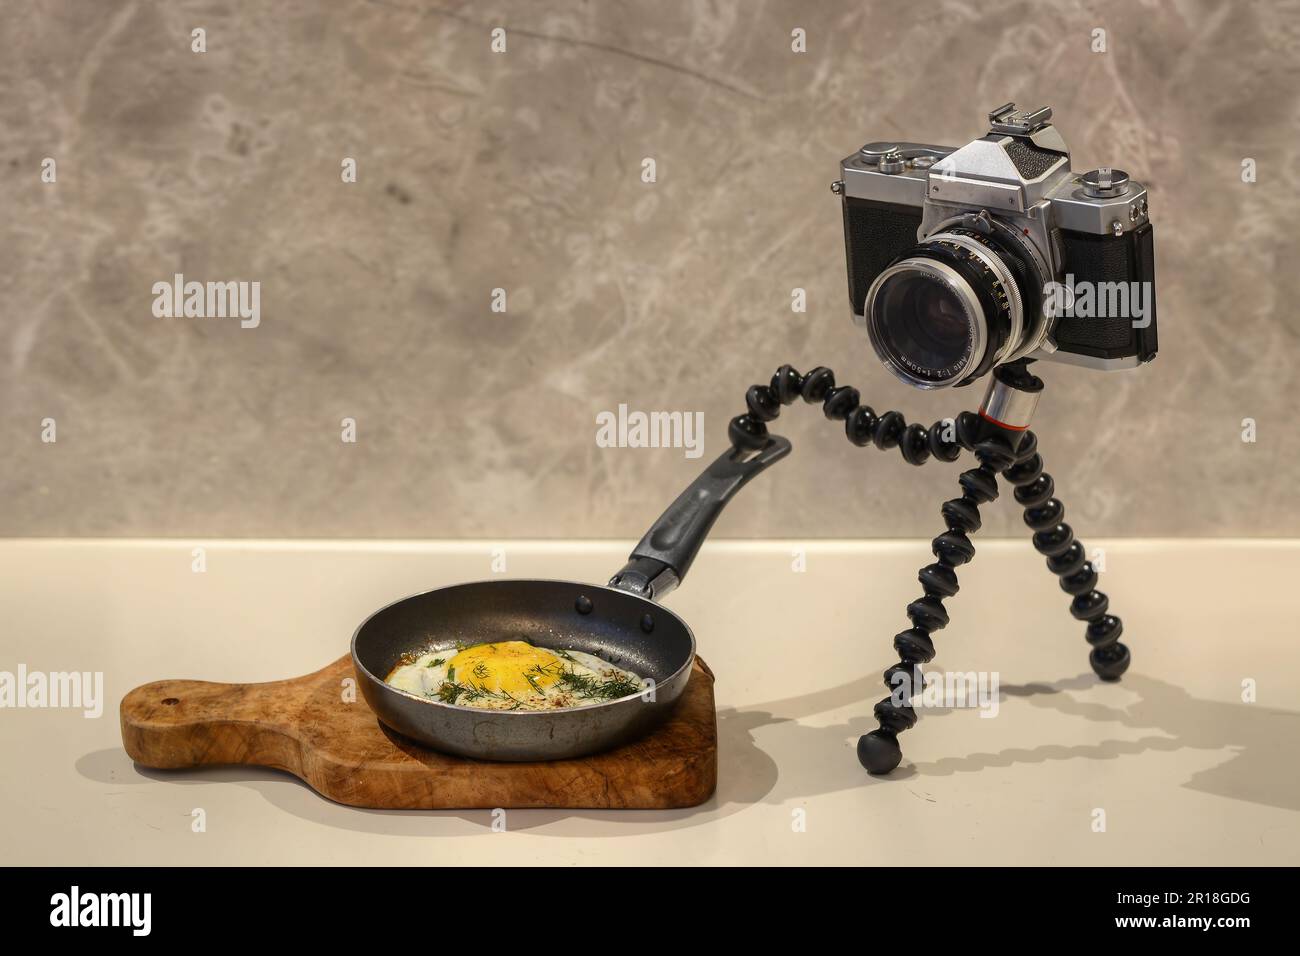 A photo of an old film SLR camera cocking a fried egg Stock Photo